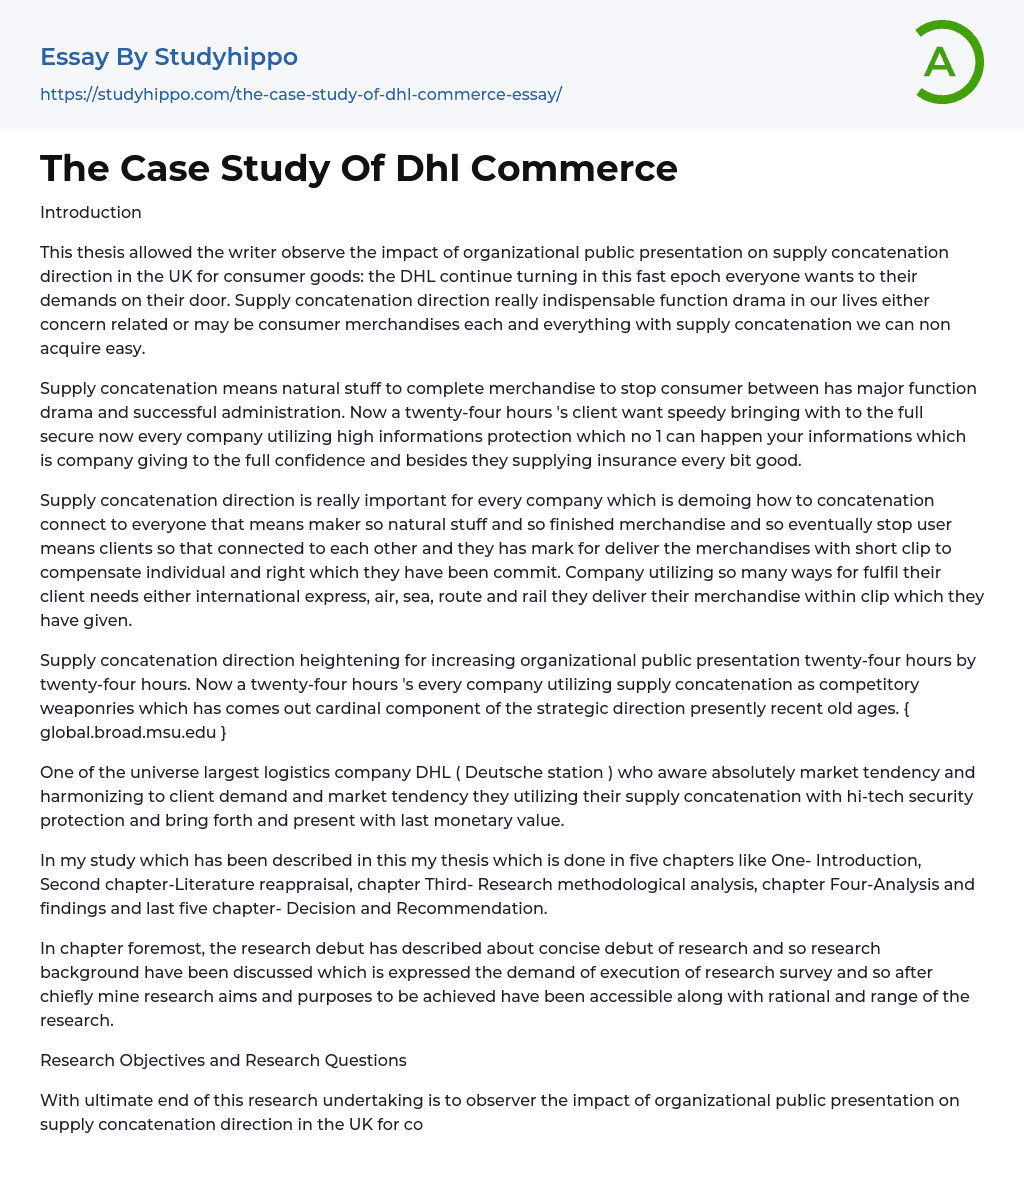 The Case Study Of Dhl Commerce Essay Example